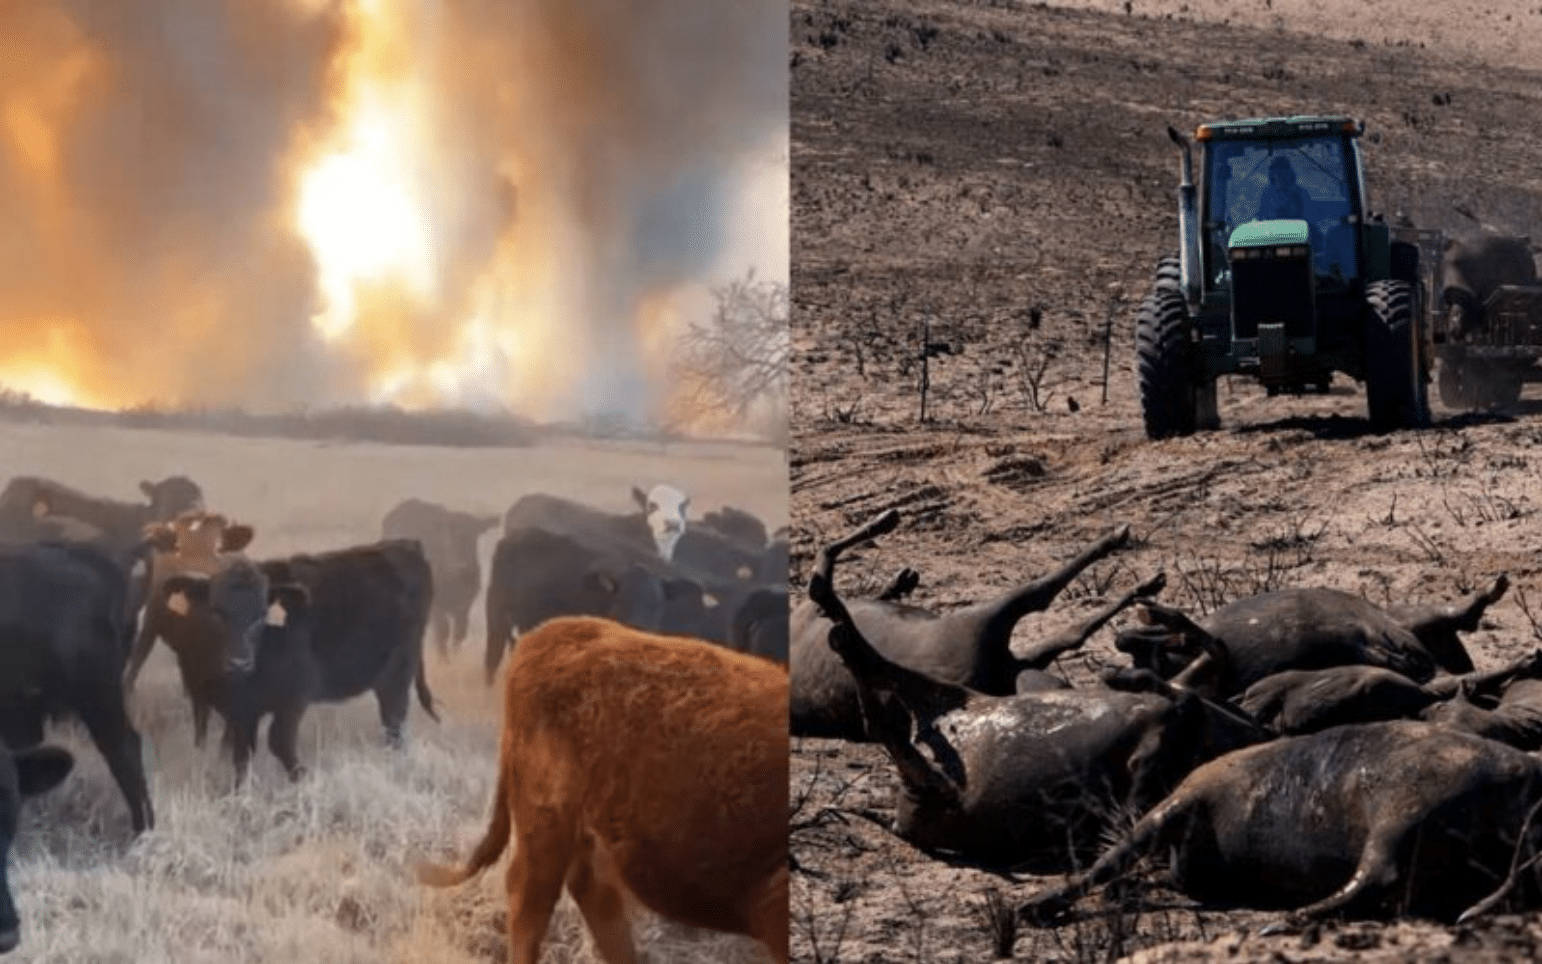 UPDATE: Texas wildfire causes ‘Catastrophic Losses’ to cattle herds: ‘Farmers & Ranchers are losing everything’